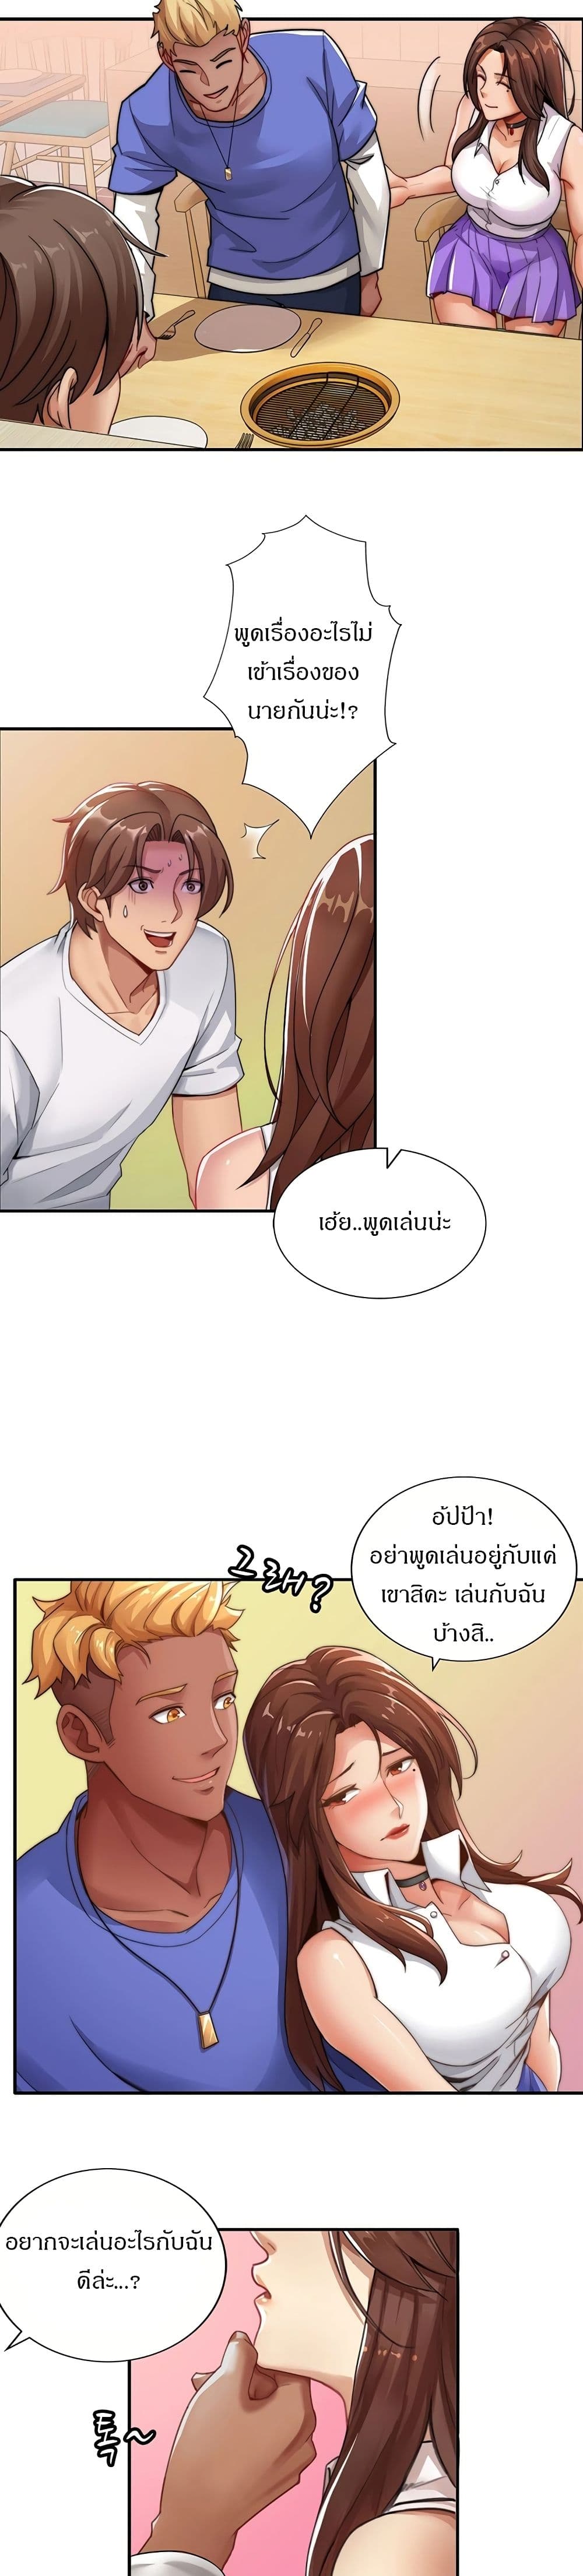 Lovers Exchange 1 ภาพที่ 19